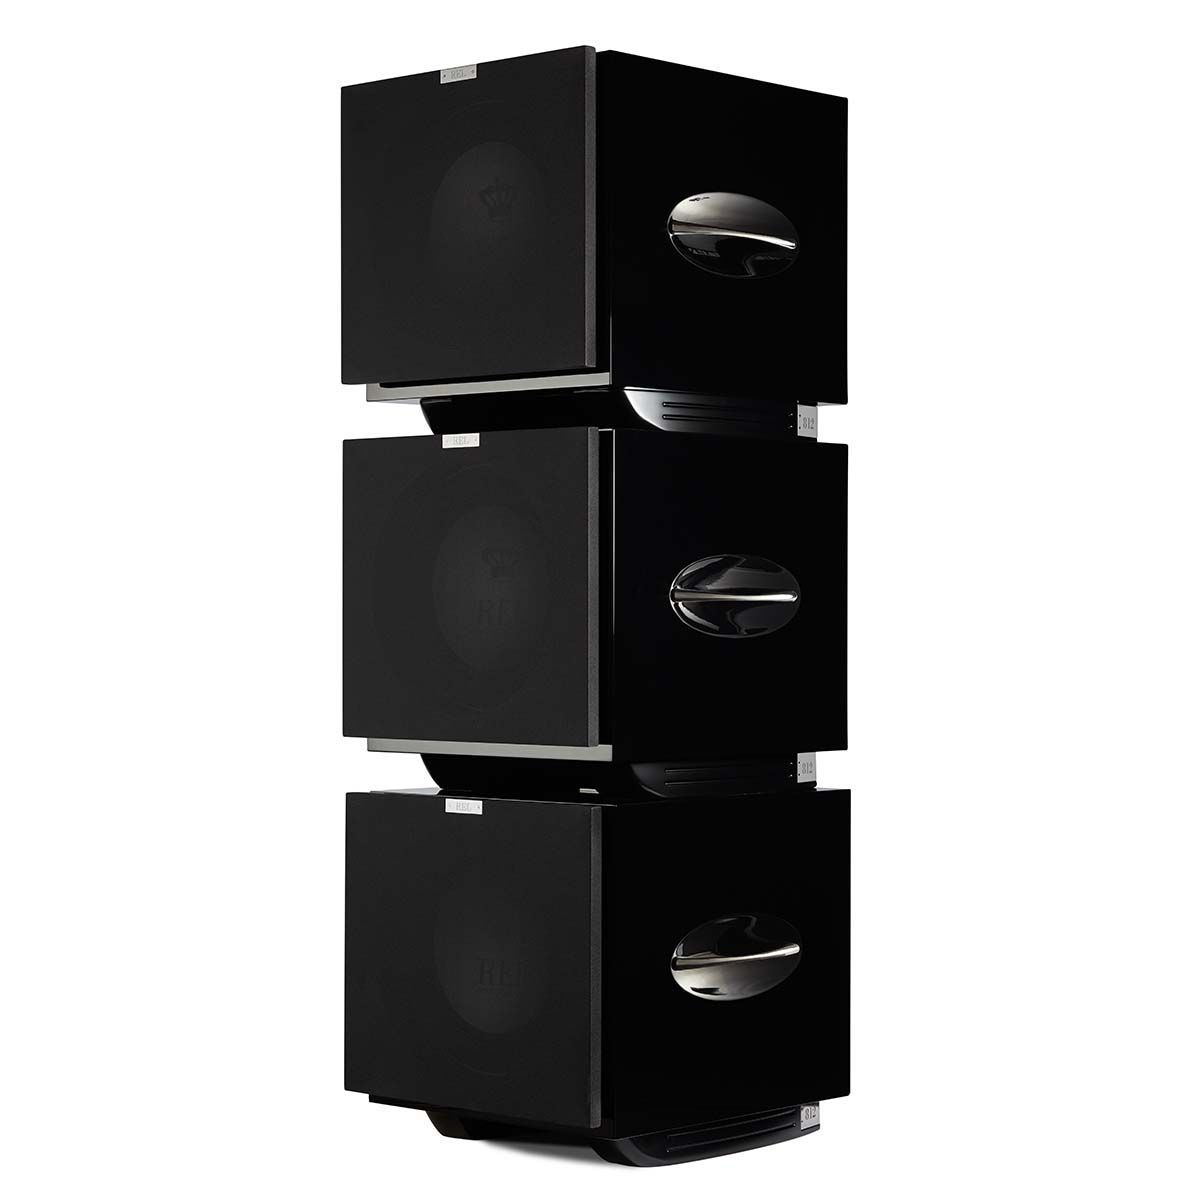 REL Acoustics S/812 Subwoofer, Black, stack of three with grilles